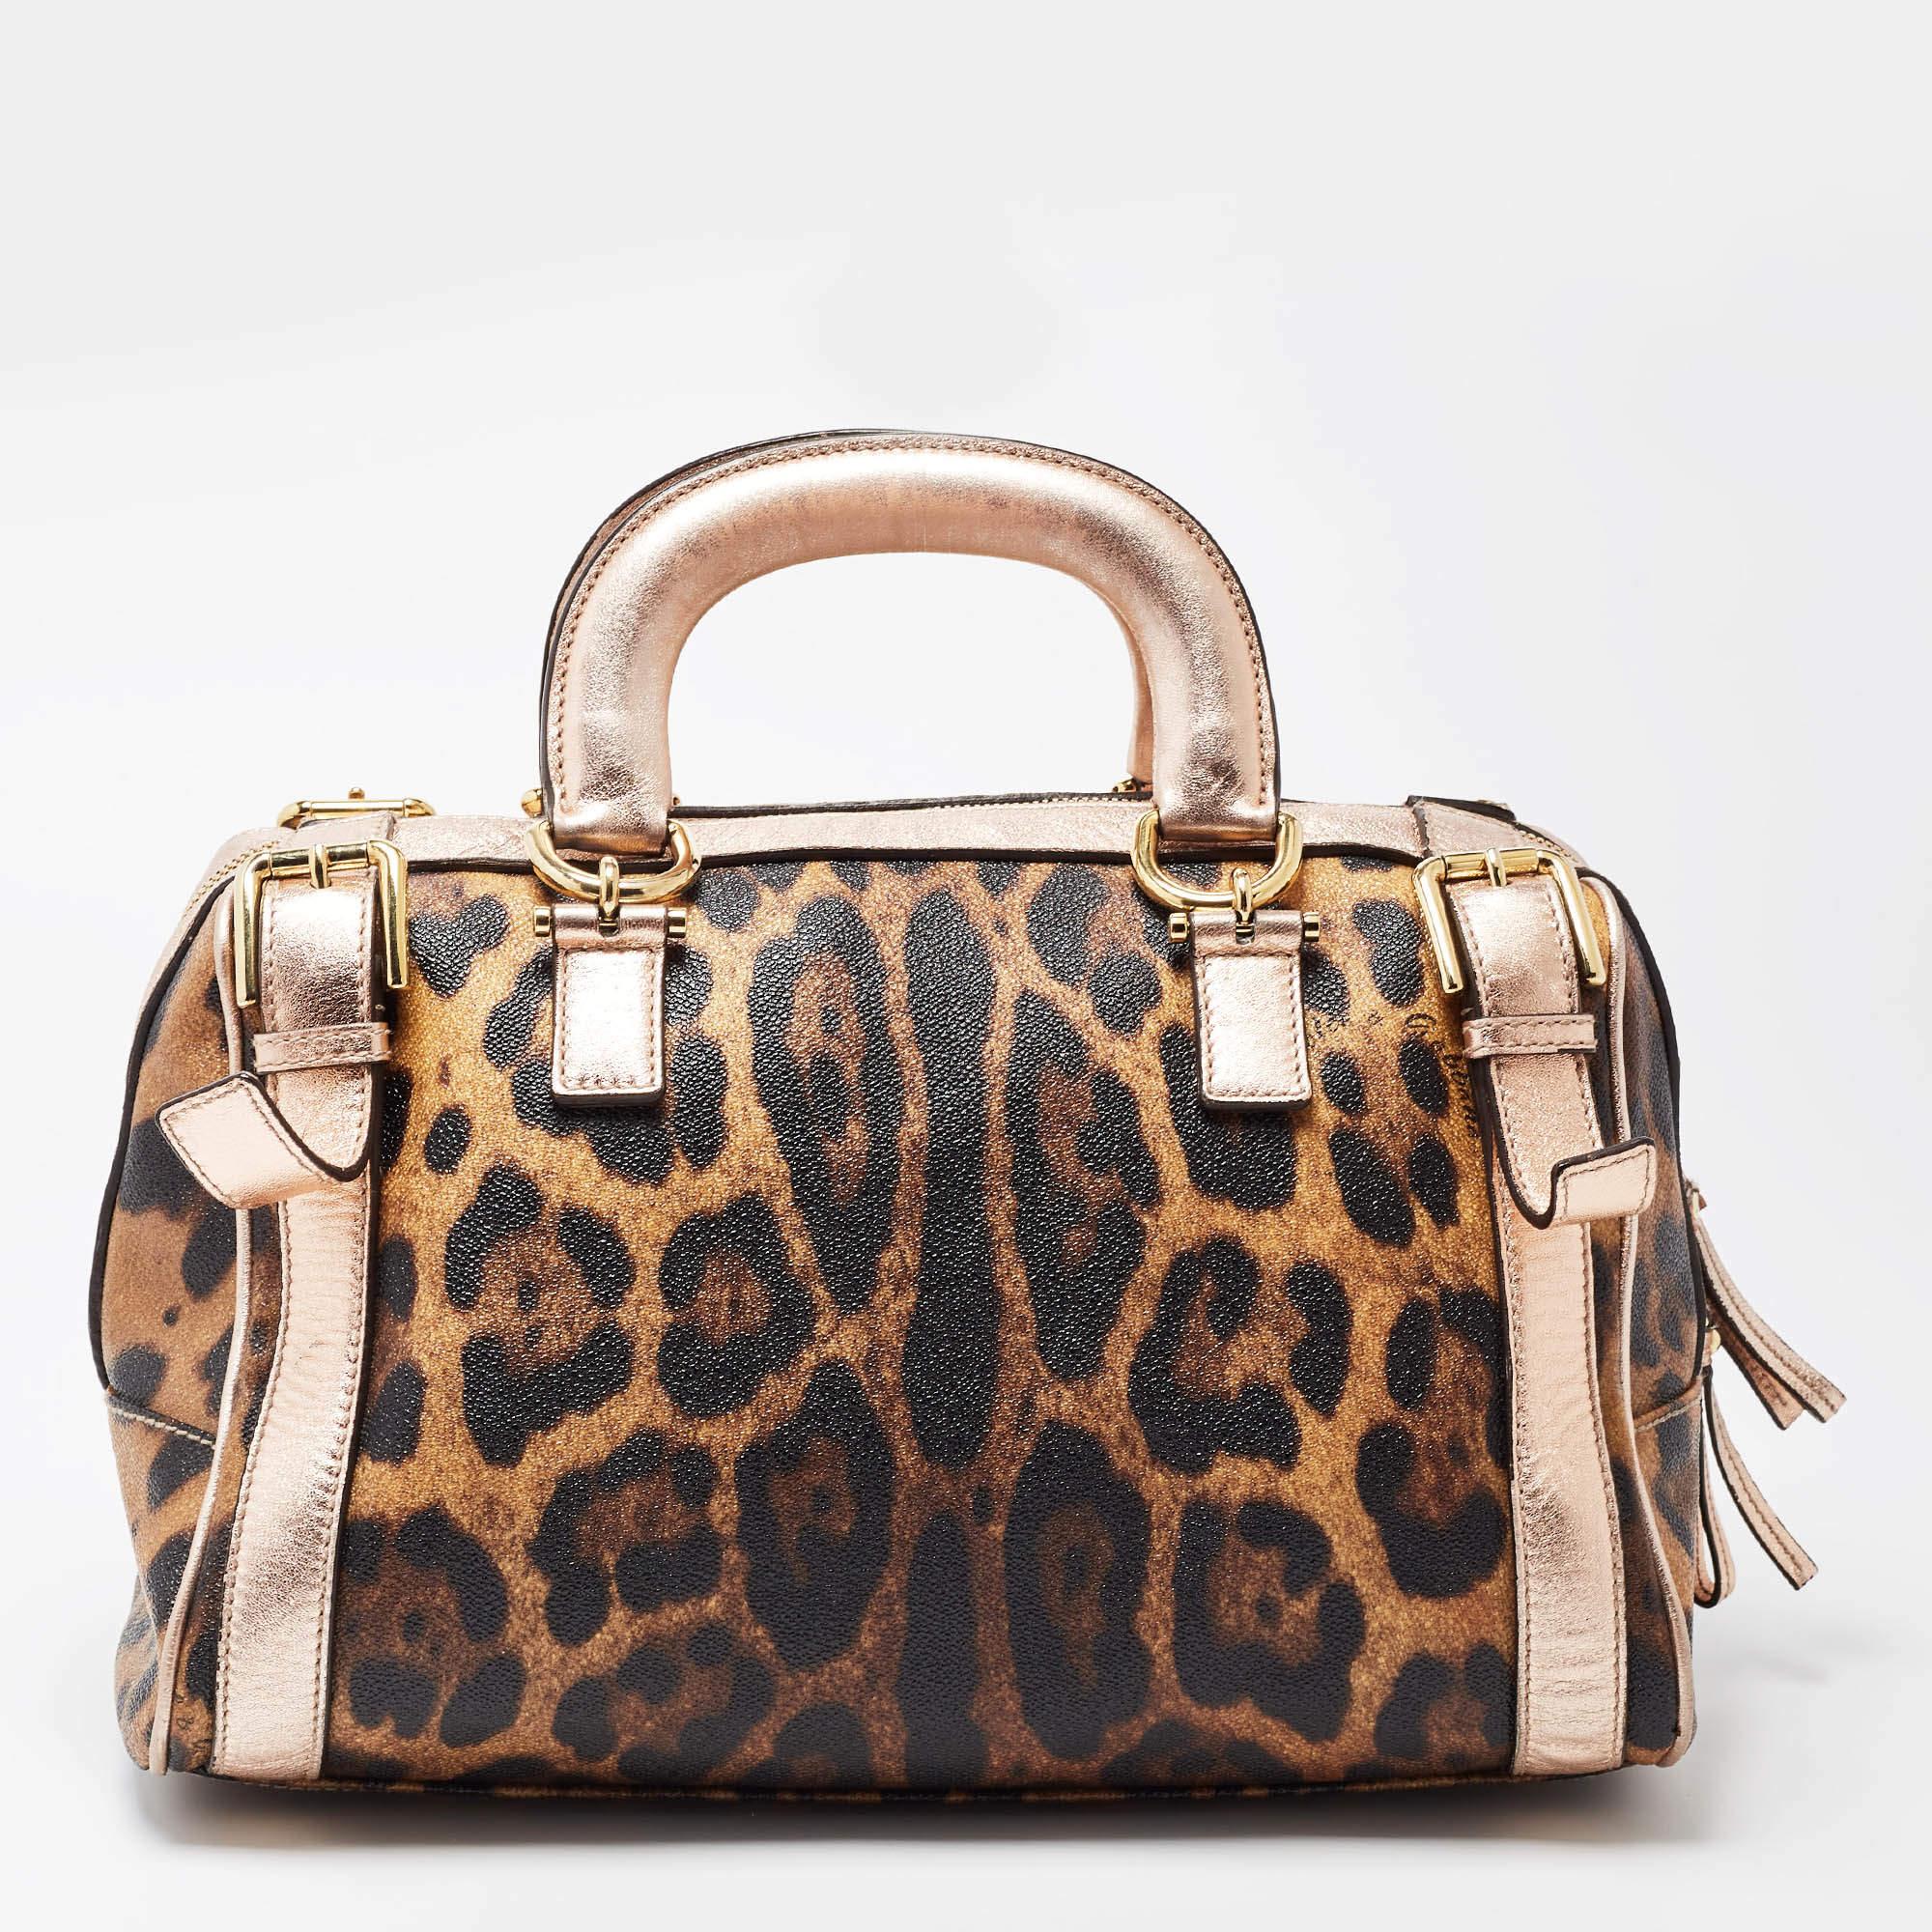 A spacious storage that can hold all that you need through the day, this Dolce and Gabbana Miss Easy Way satchel will look chic and stylish with a versatile function for everyday use. Crafted in brown leopard printed coated canvas, this bag is